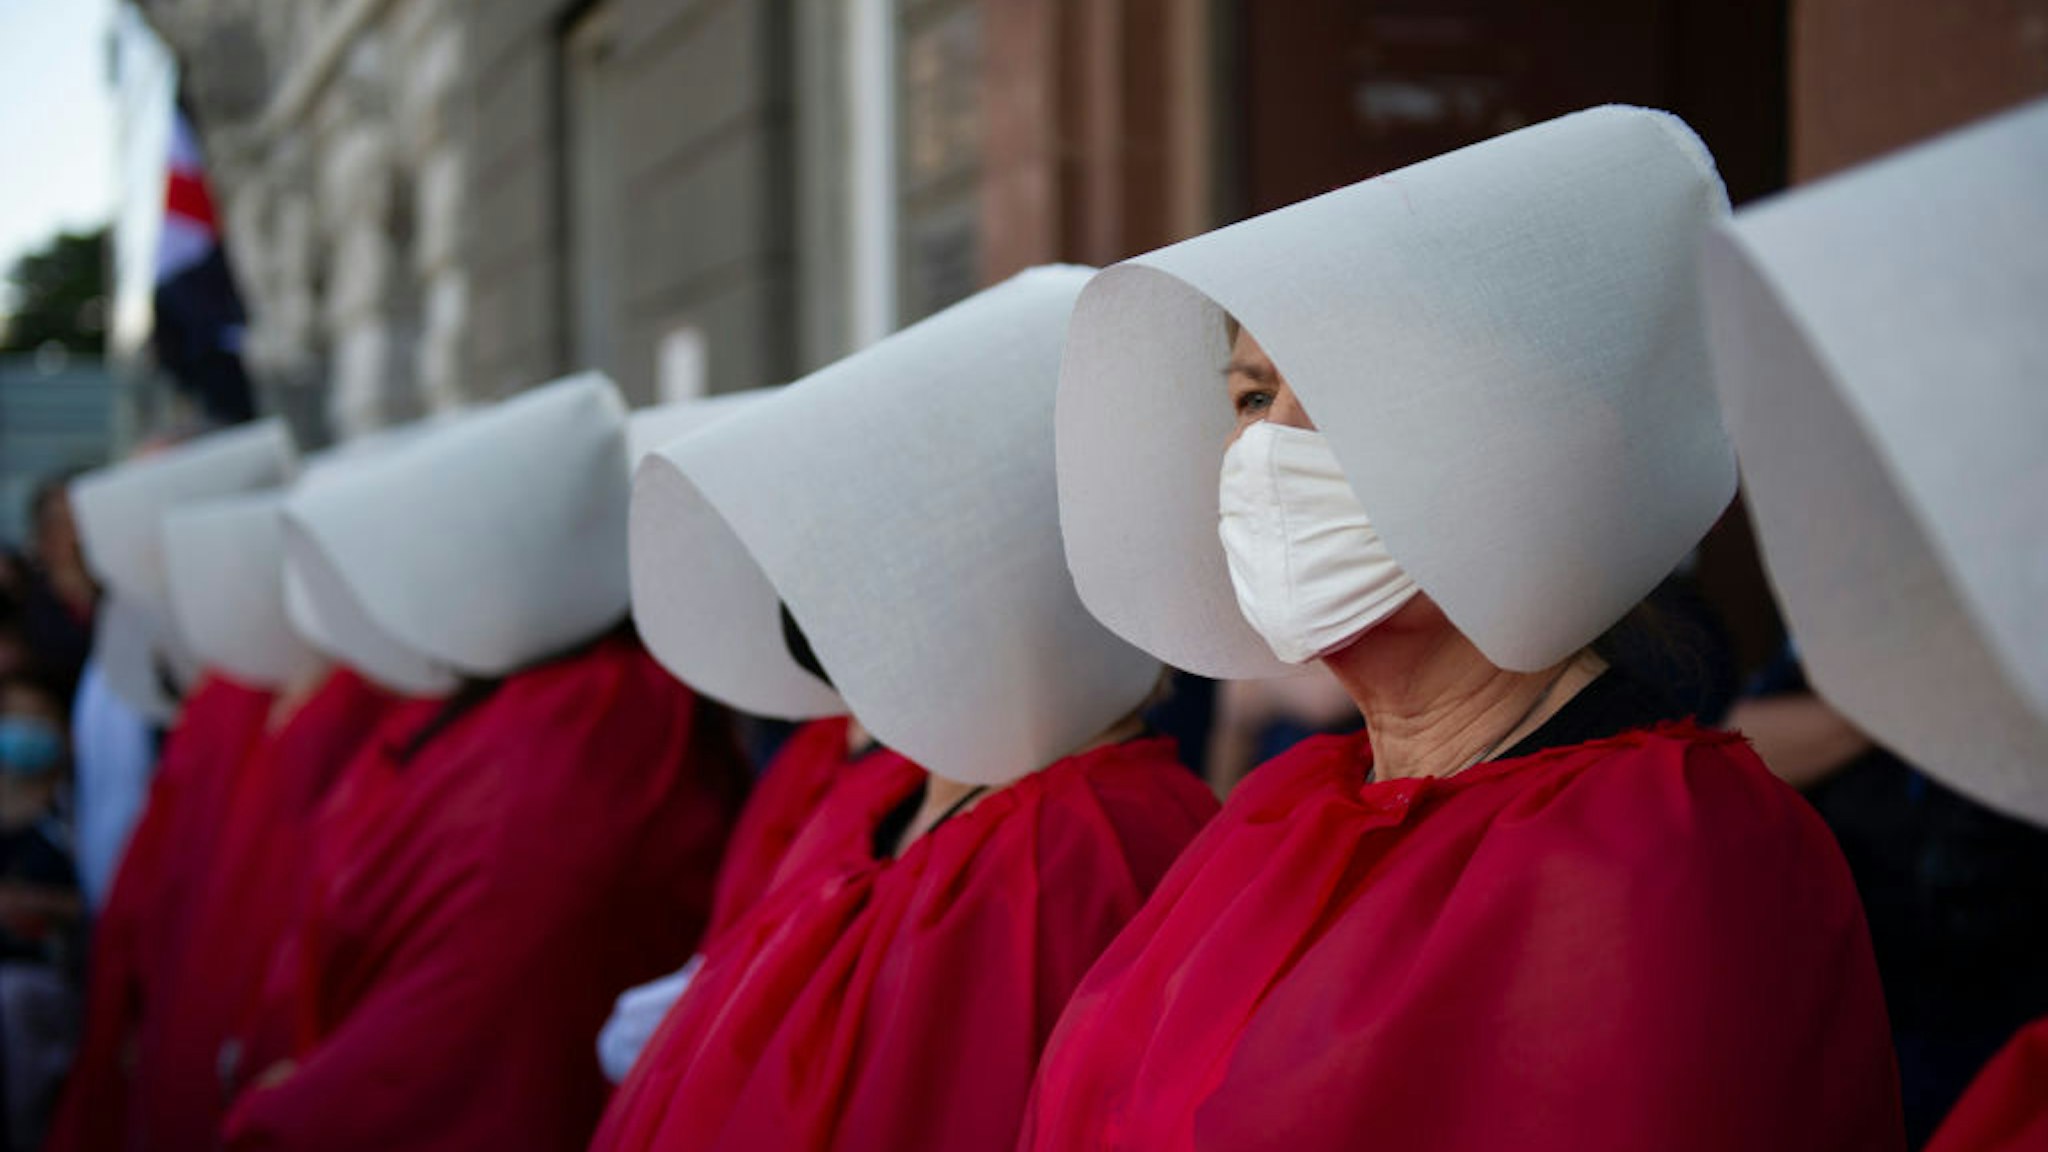 Demonstrators wearing protective face masks are dressed as the Handmaids from the dystopian novel The Handmaid's Tale from the Canadian author Margaret Atwood perform during an anti-domestic violence protest on July 24, 2020 in Warsaw, Poland. Thousands of demonstrators took part in a protest against government plan to pull out of an international treaty on preventing and combating domestic violence. (Photo by Aleksander Kalka/NurPhoto via Getty Images)